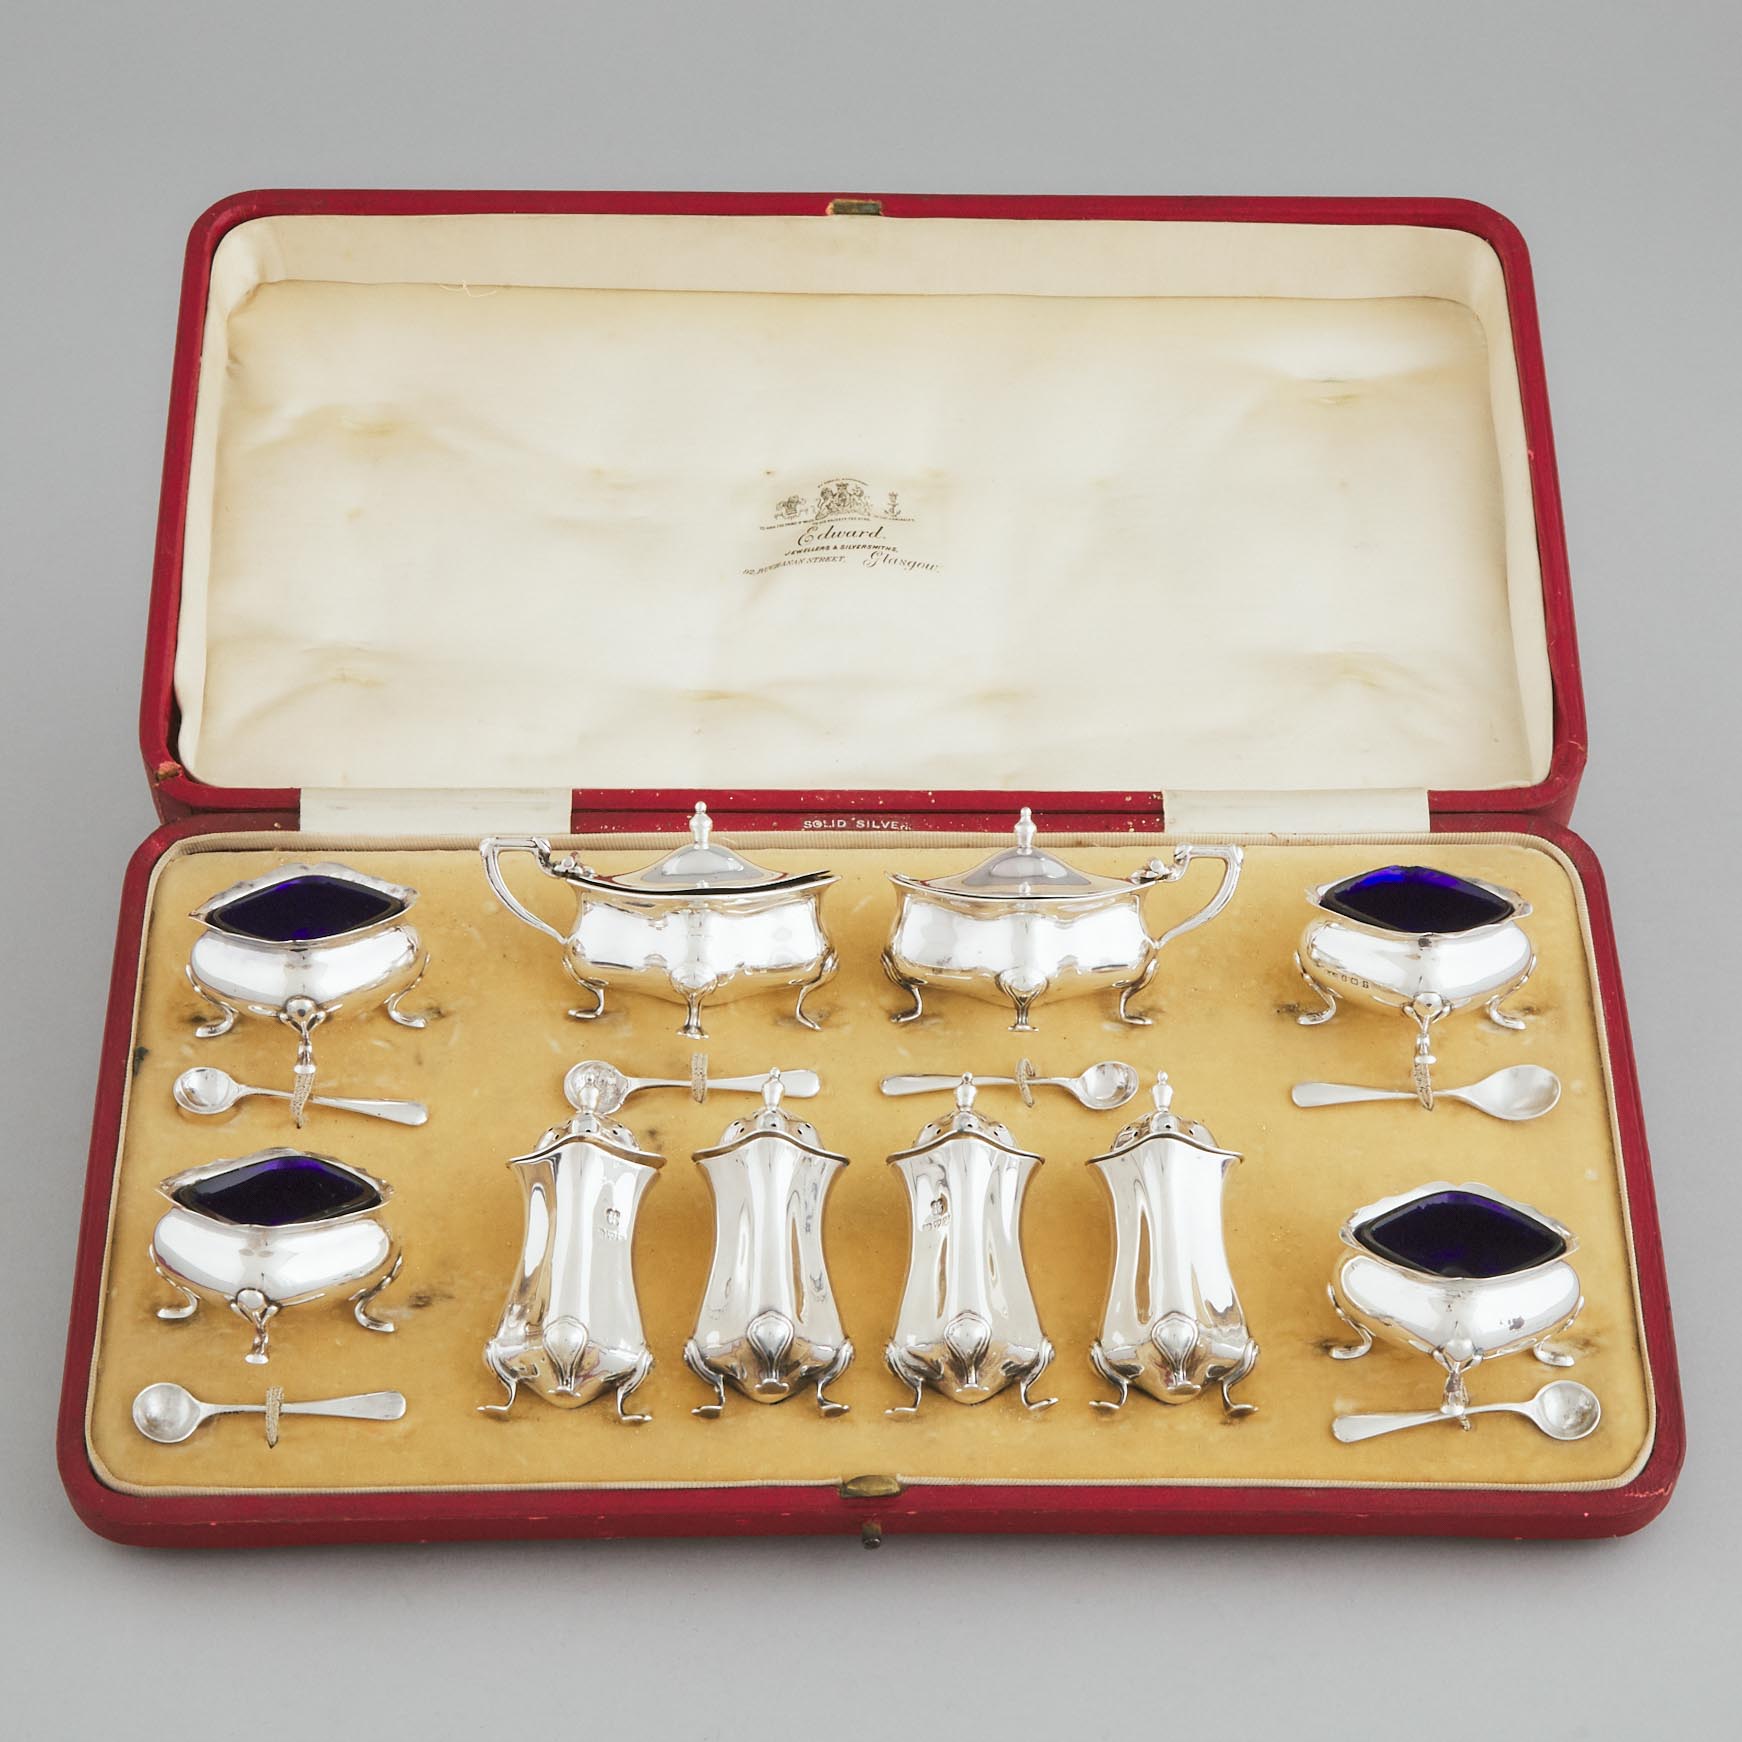 Edwardian Silver Condiment Set, E.S. Barnsley & Co. and George Edward & Sons, Birmingham and Chester, 1910